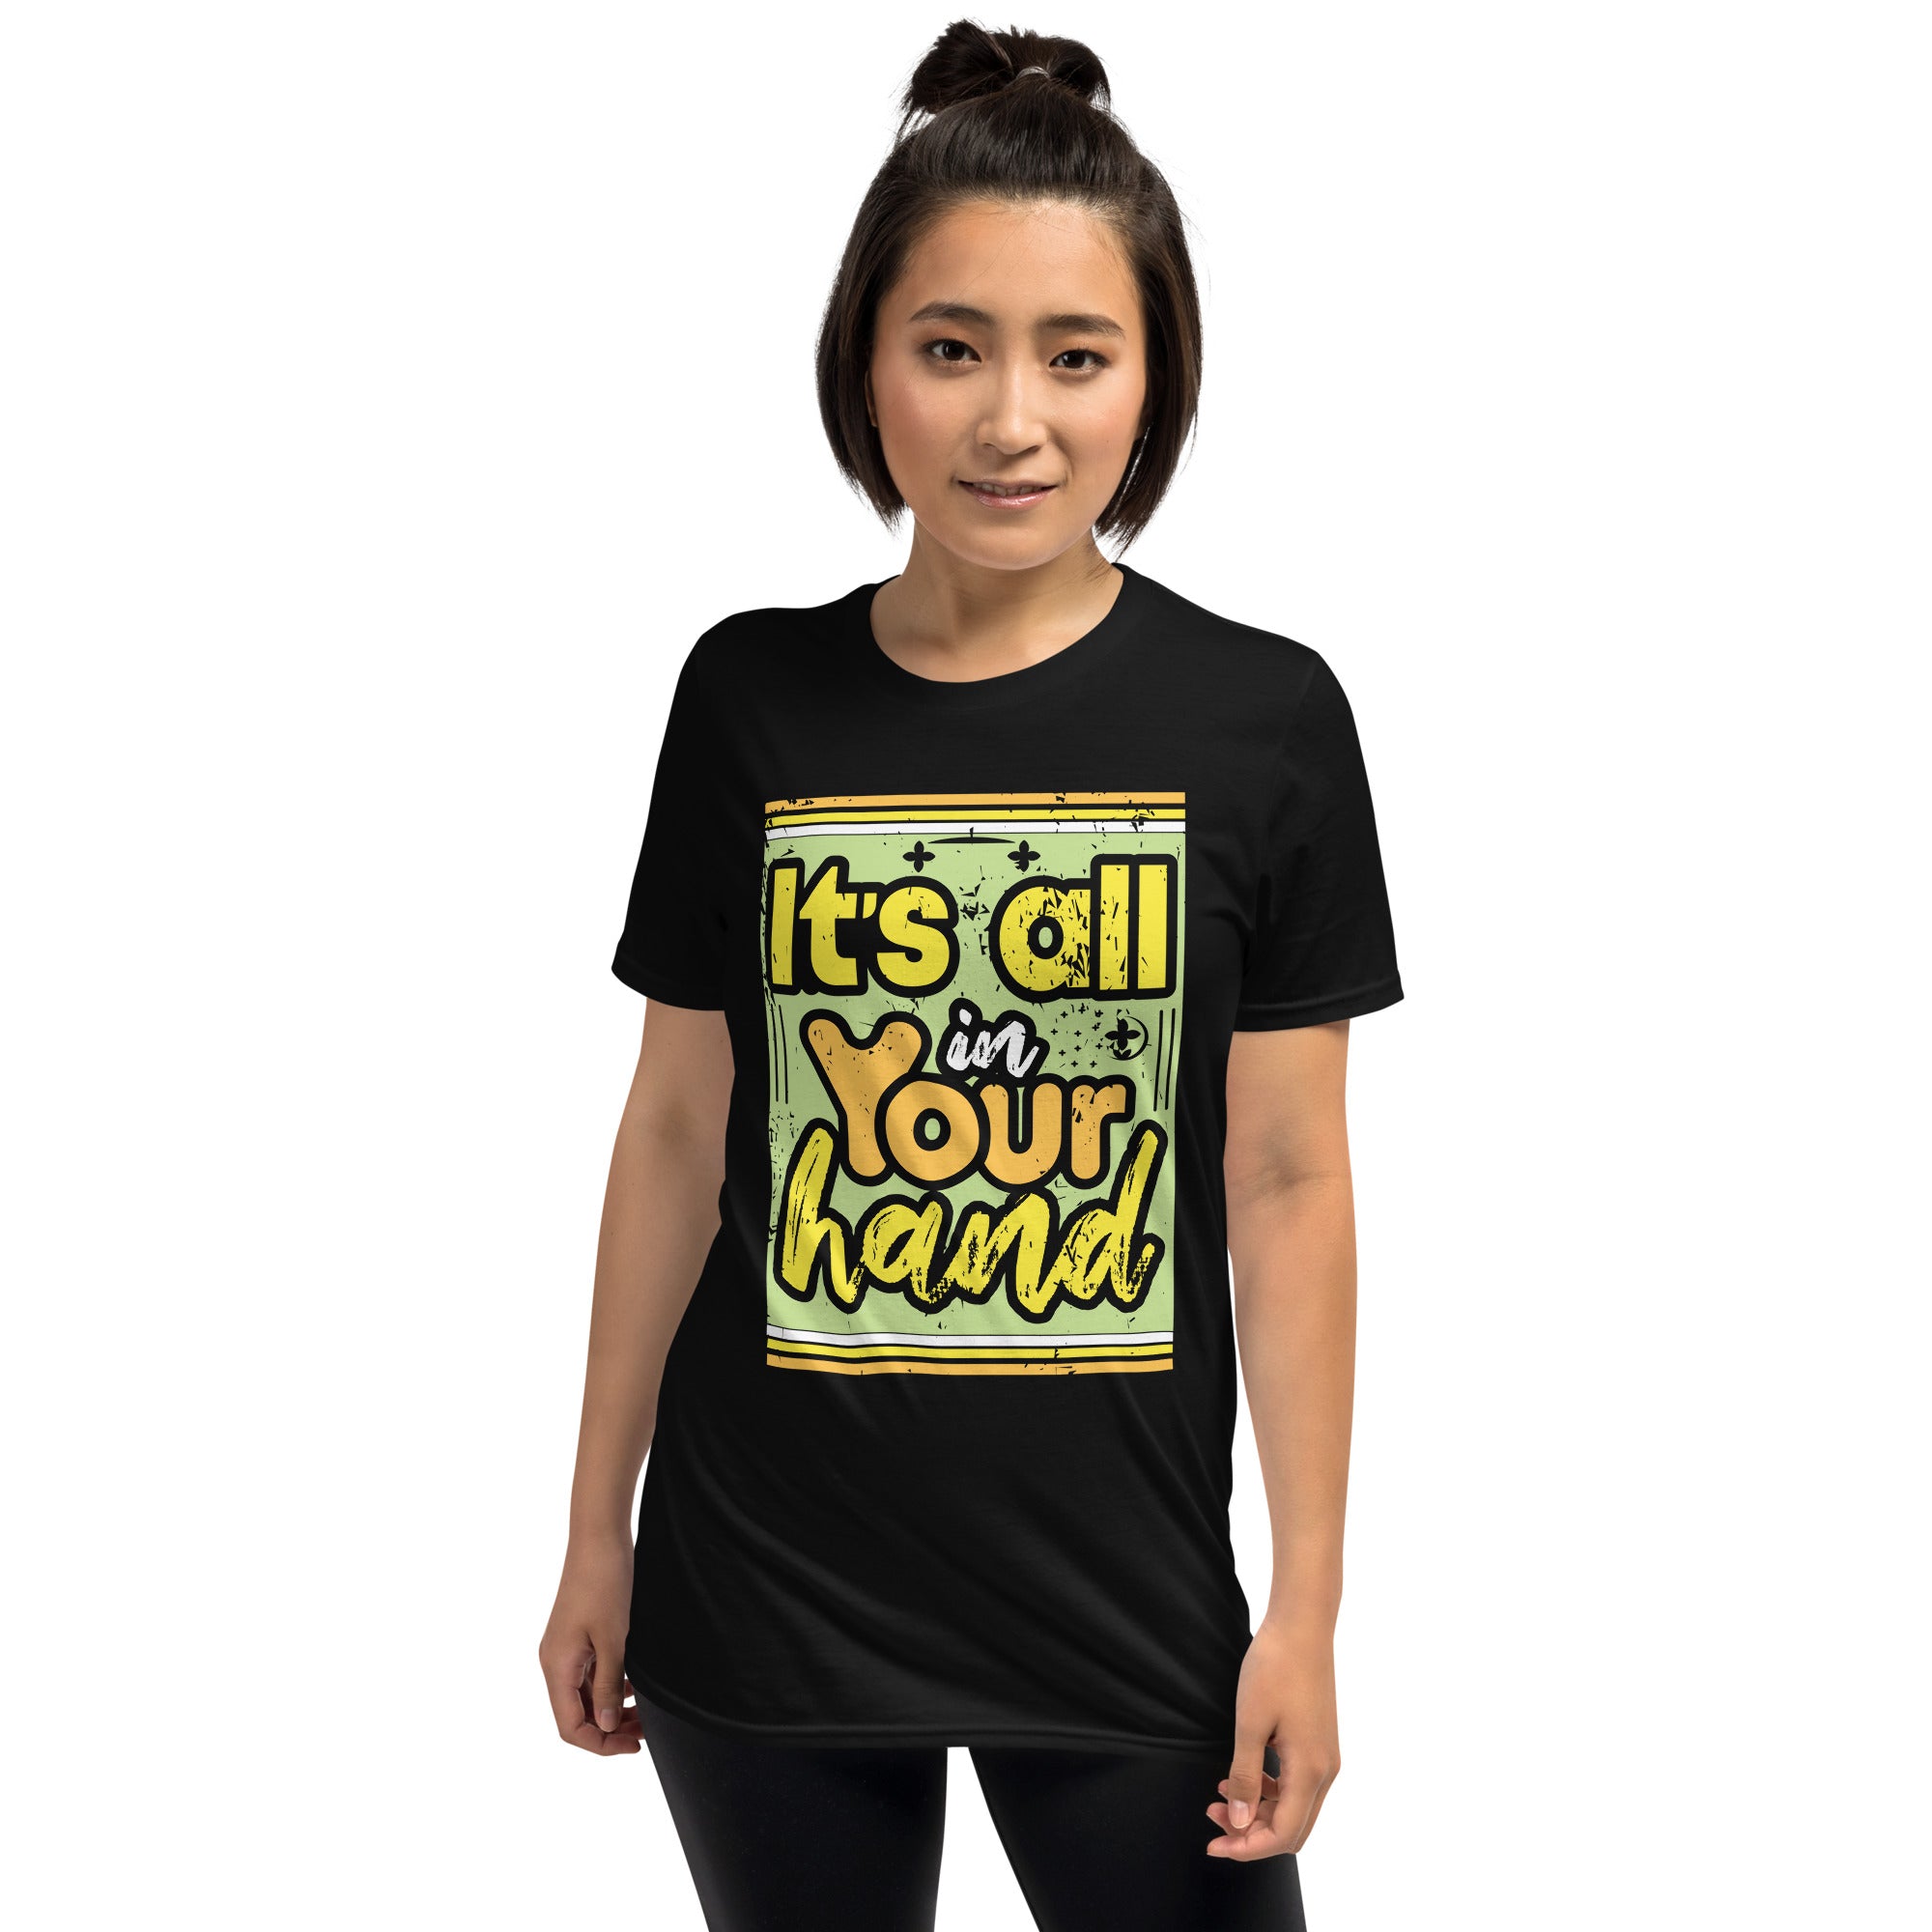 It's All In Your Hand - Short-Sleeve Unisex T-Shirt